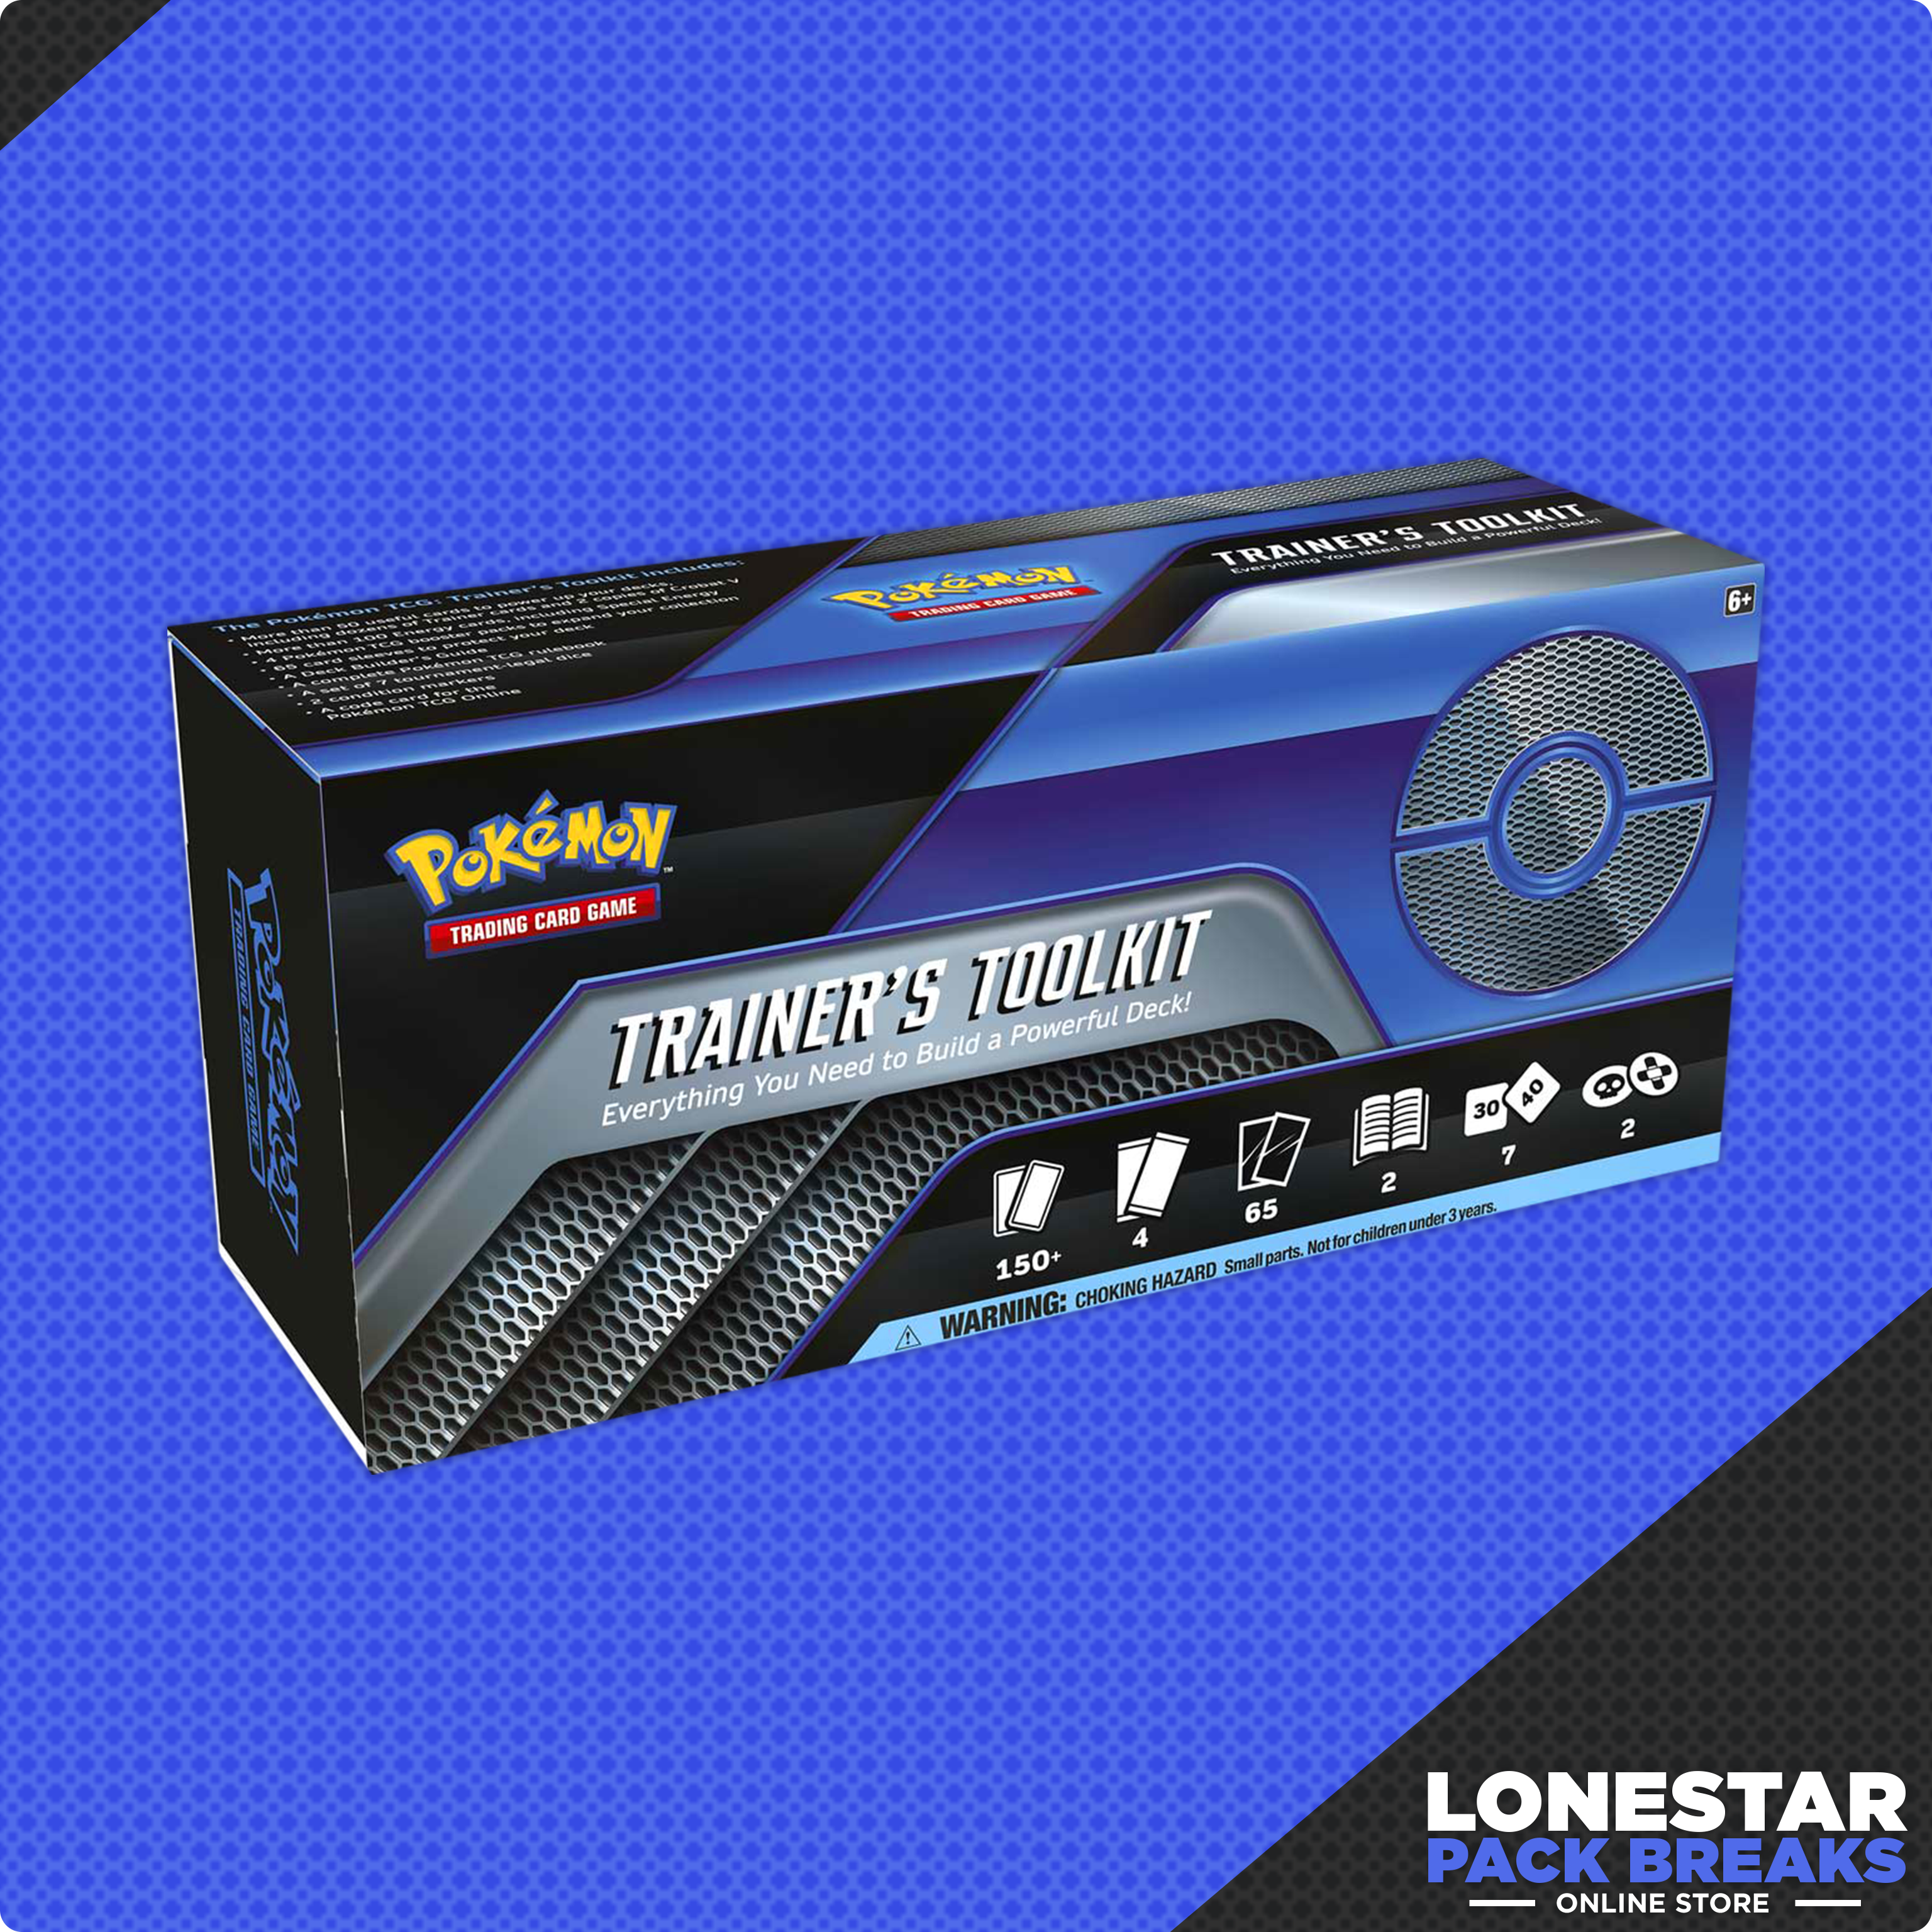 Trainer’s Toolkit everything You To Build a Powerful Deck